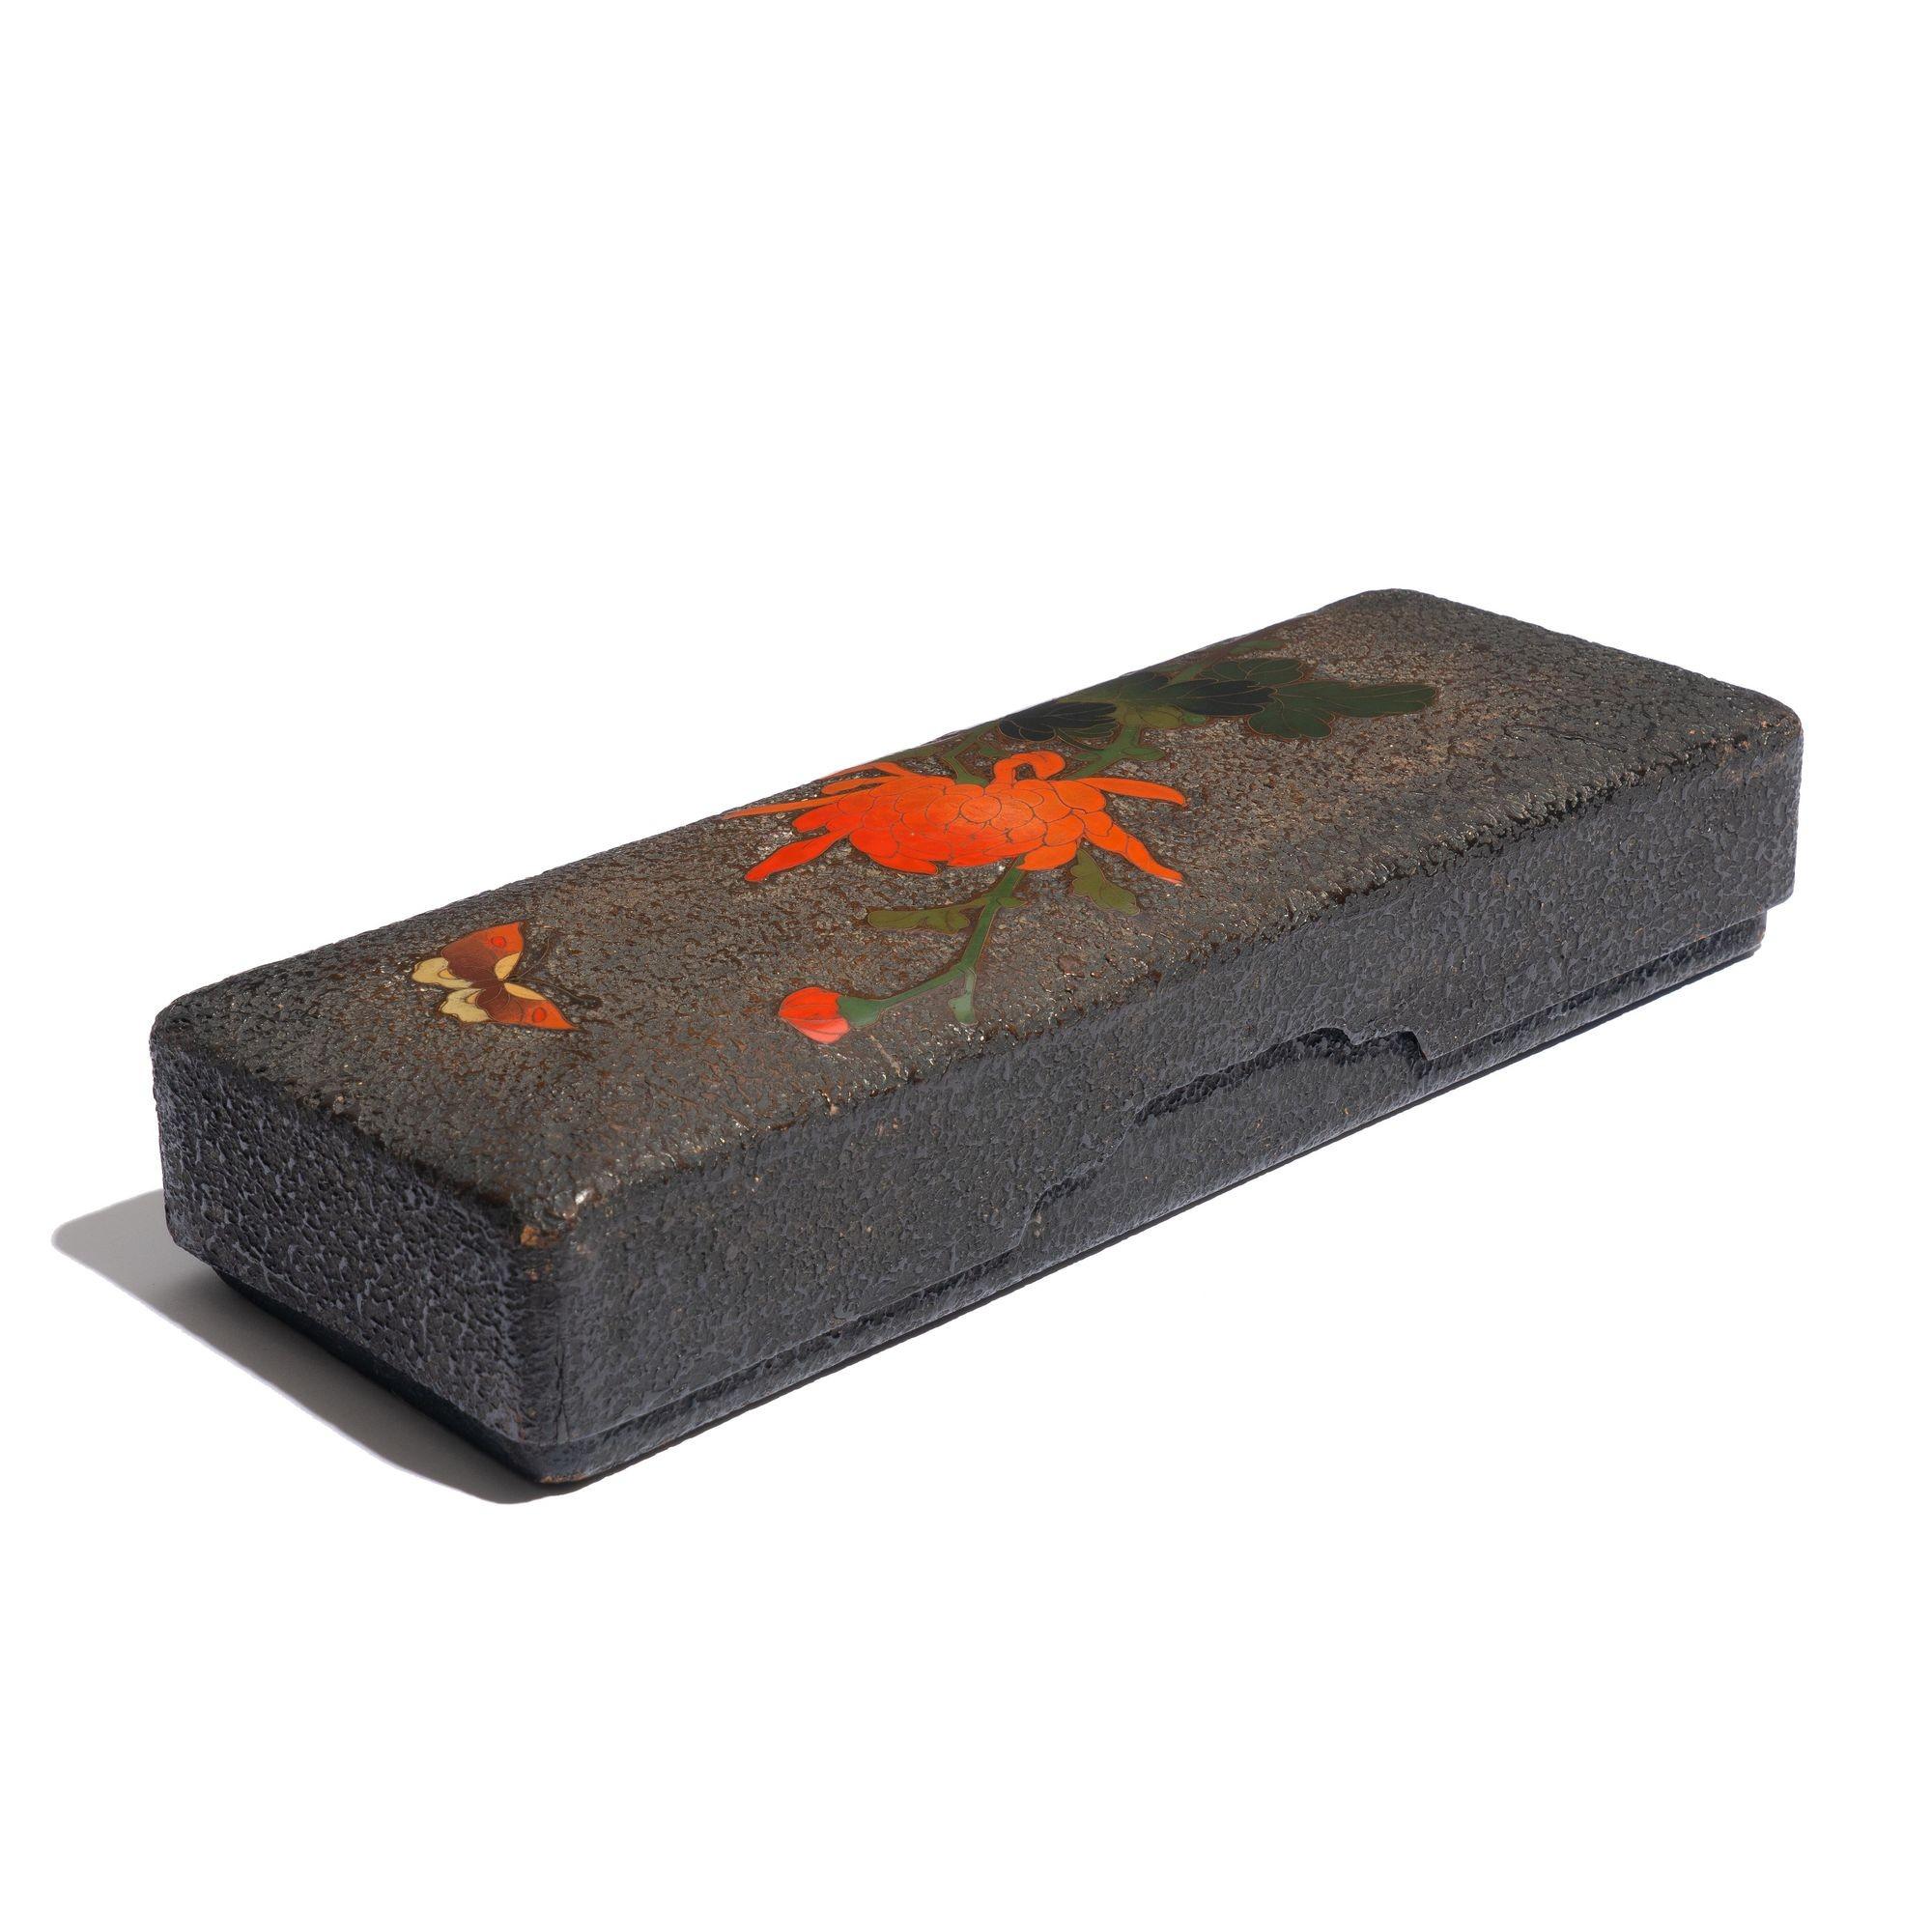 Japanese Bark Textured Lacquer Glove Box, c. 1900 For Sale 5